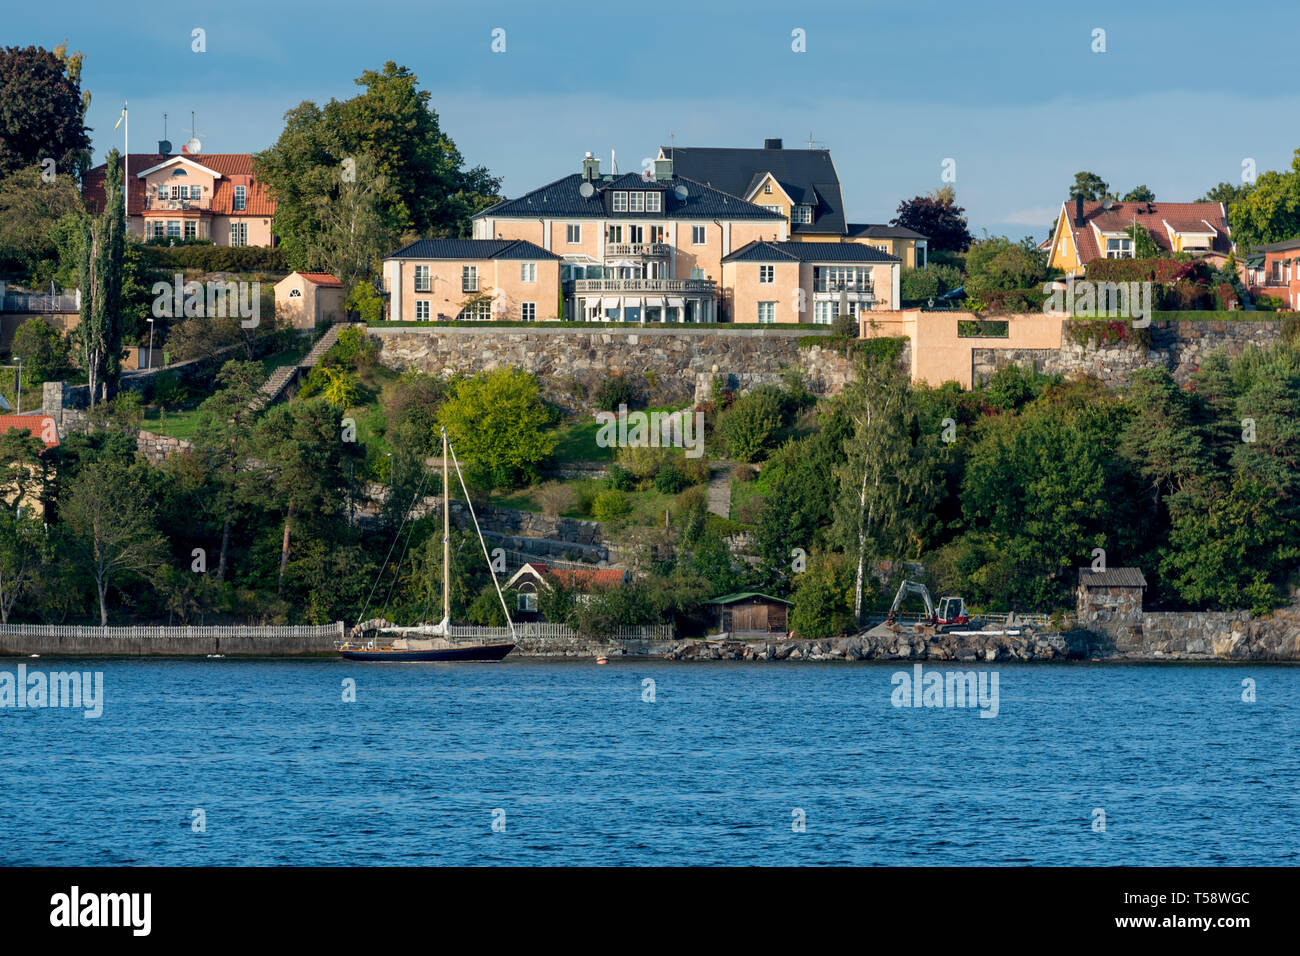 A substantial luxury residential property in Grindstigen, with views across the Stockholm inlet and the sea towards Nacka and the Skuru Sound. Stock Photo